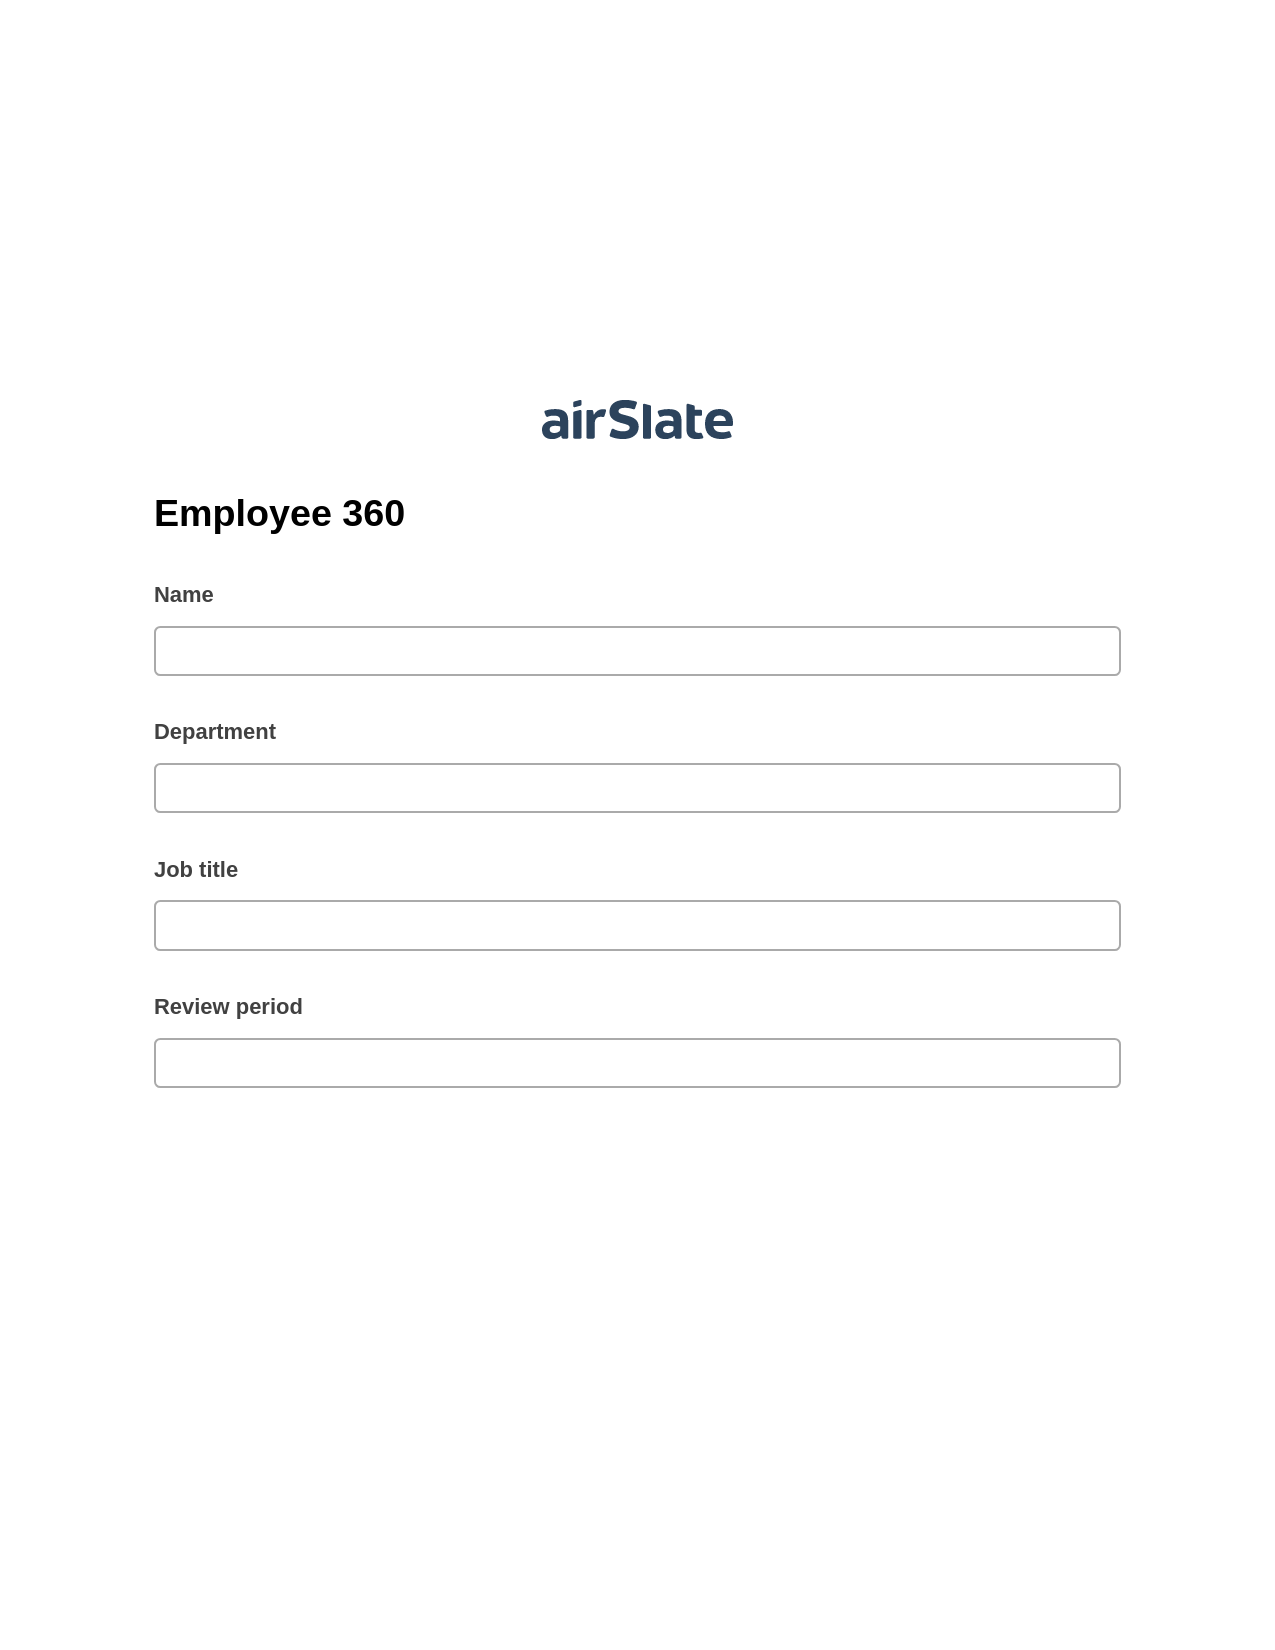 Employee 360 Pre-fill Document Bot, Open under a Role Bot, Export to Smartsheet